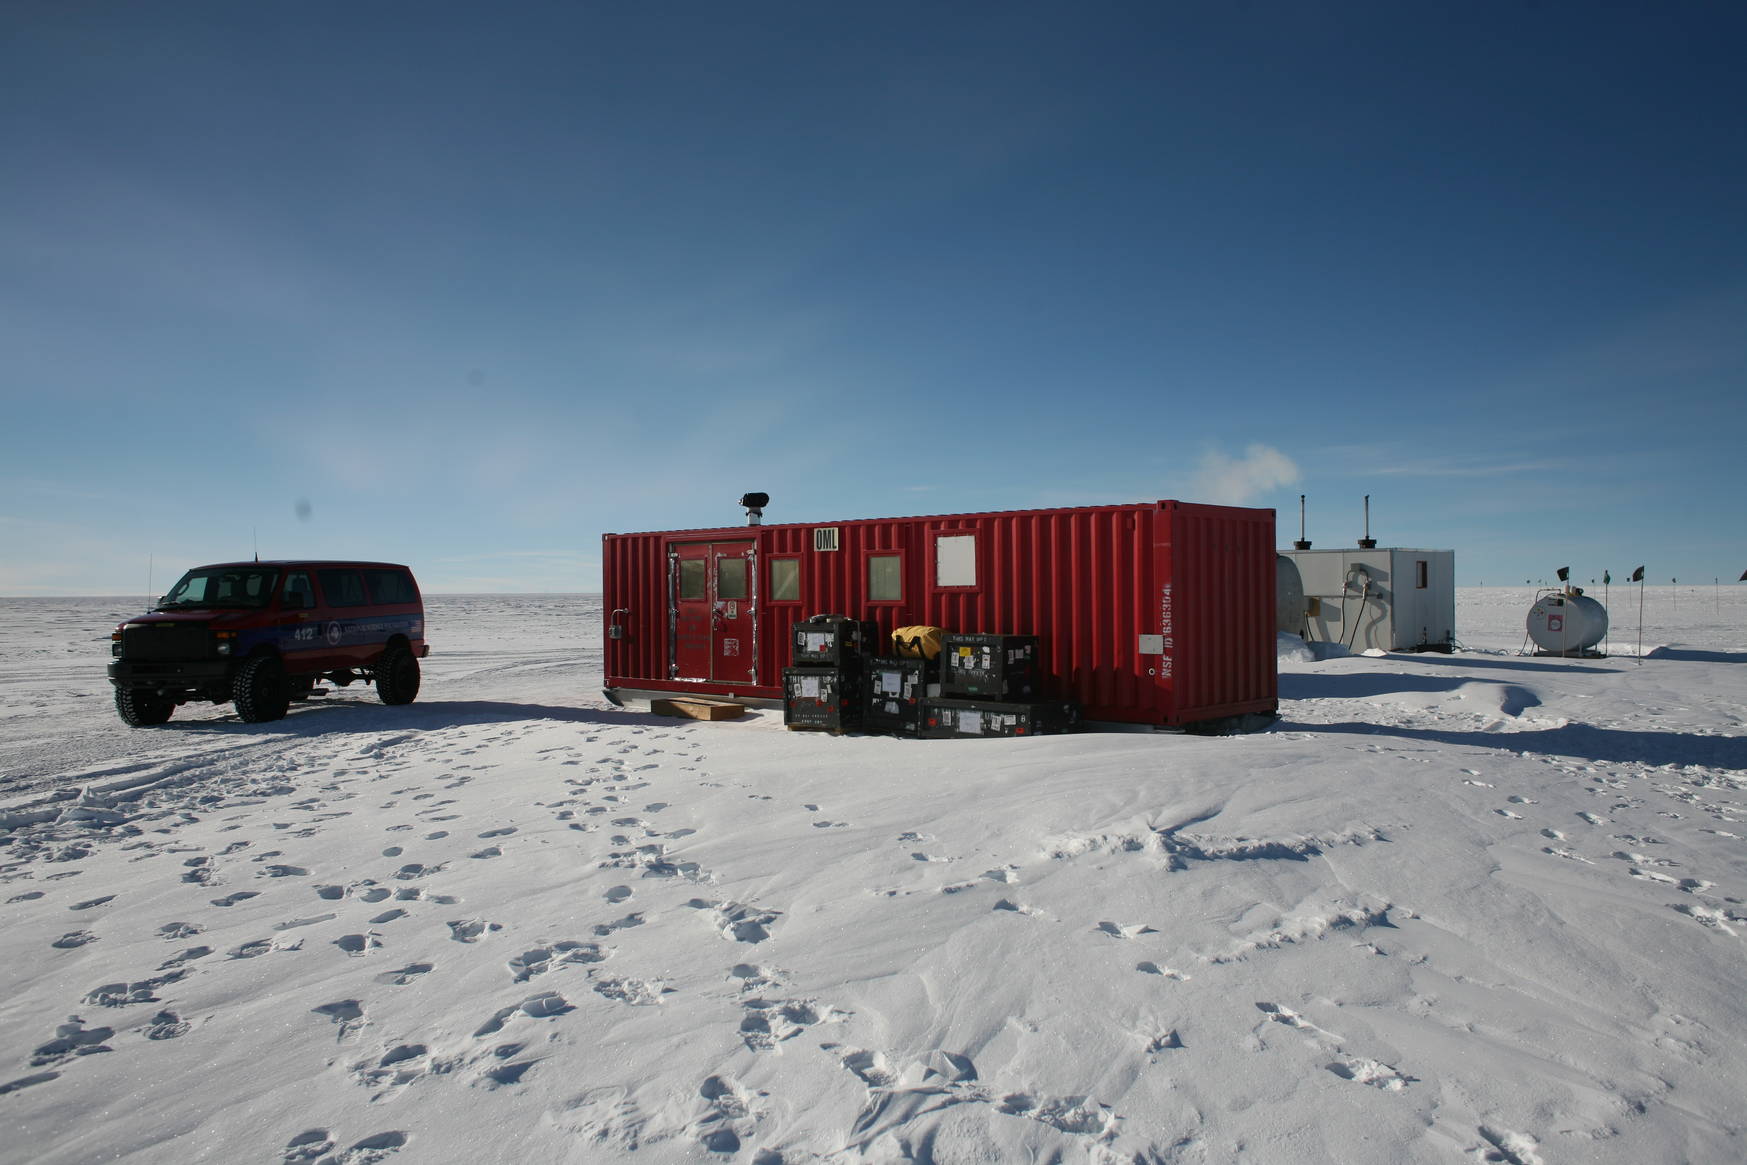 A container serves as a visitor centre and as a room to warmp up in. Behind the visitor centre is a container housing a camping toilet, and a generator station.